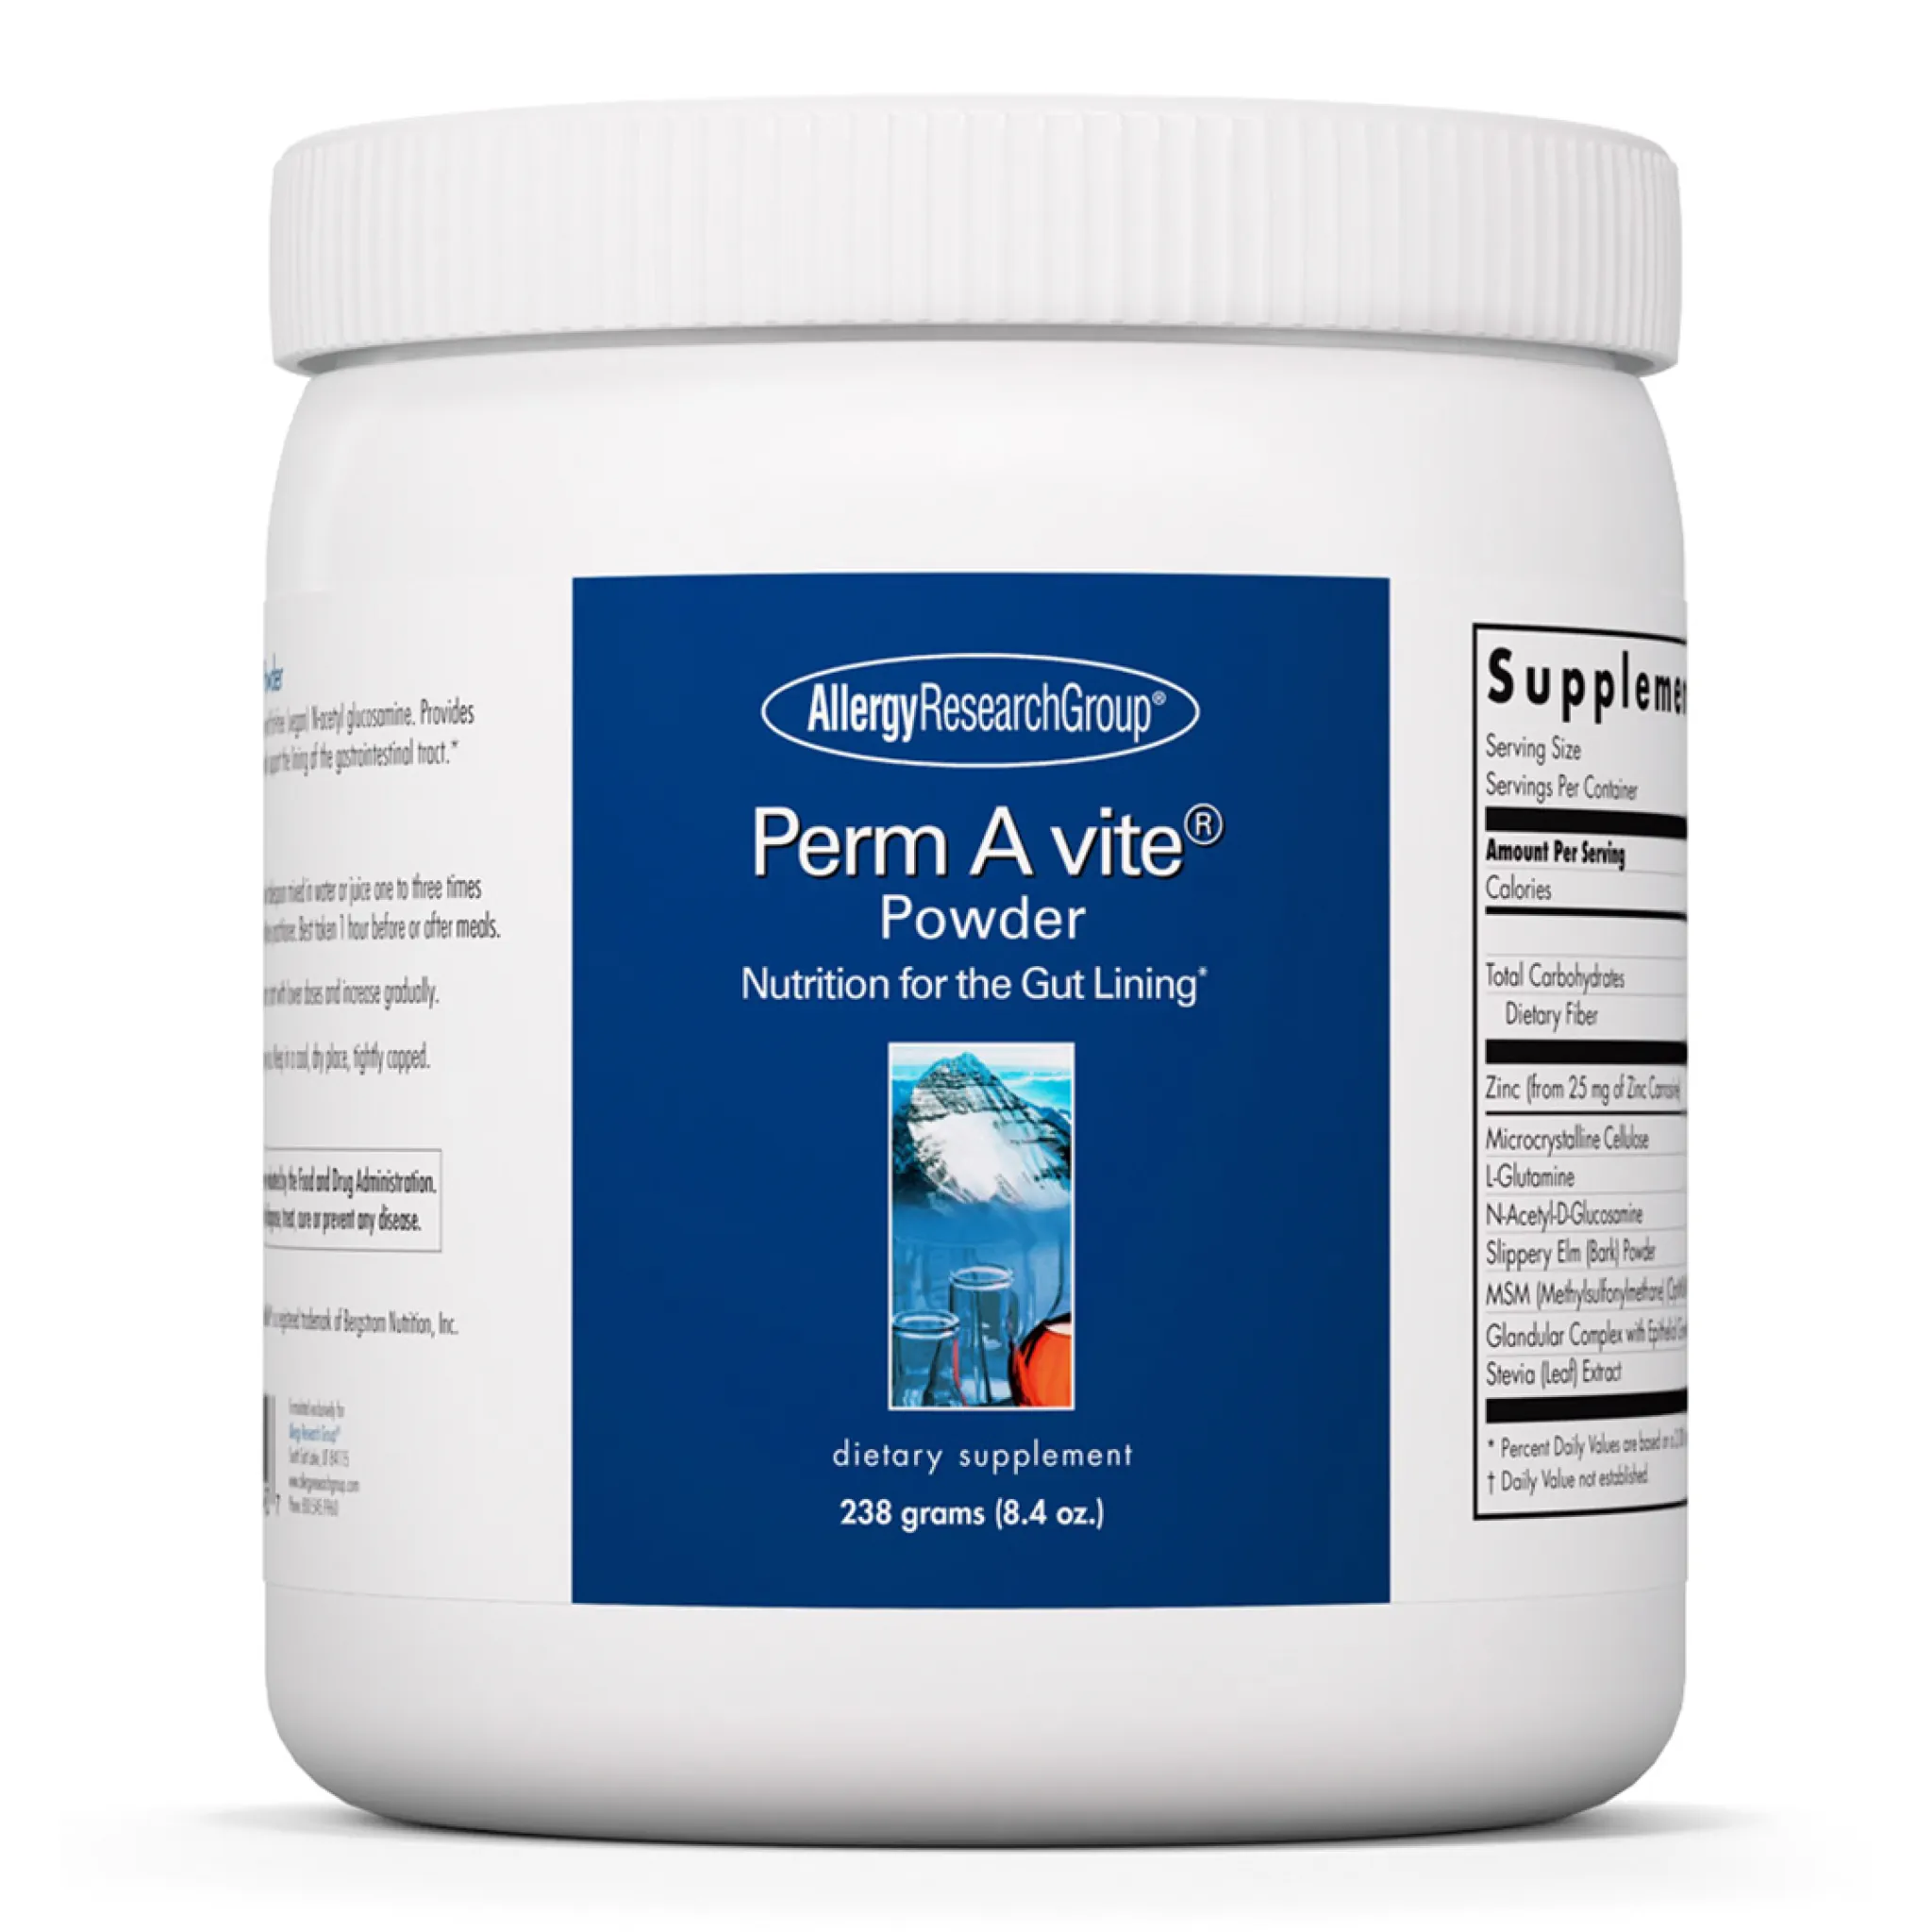 Allergy Research Group - Perm A Vite powder